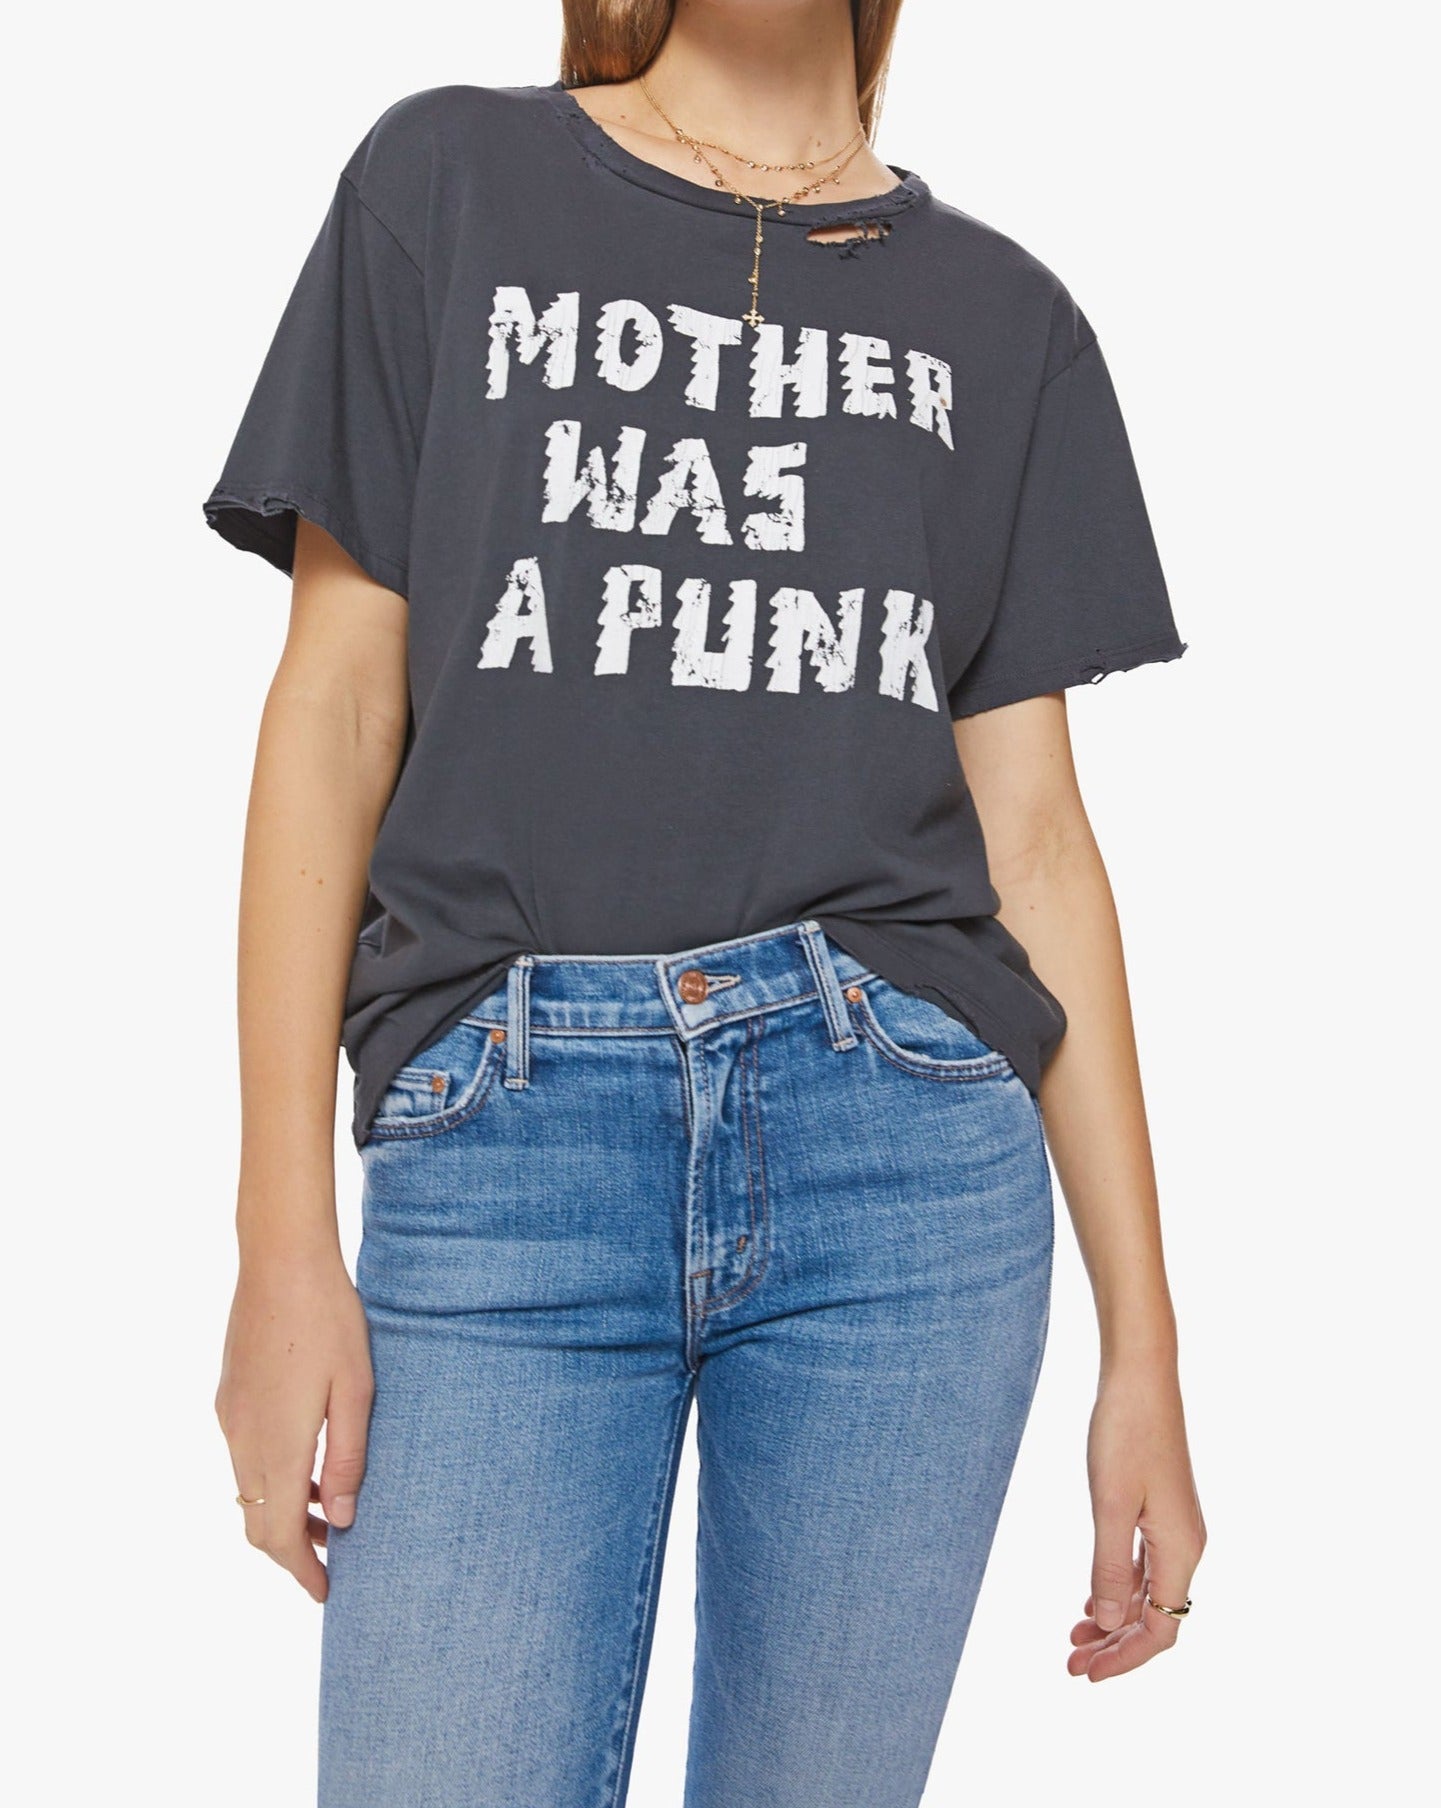 The Rowdy Mother Was a Punk